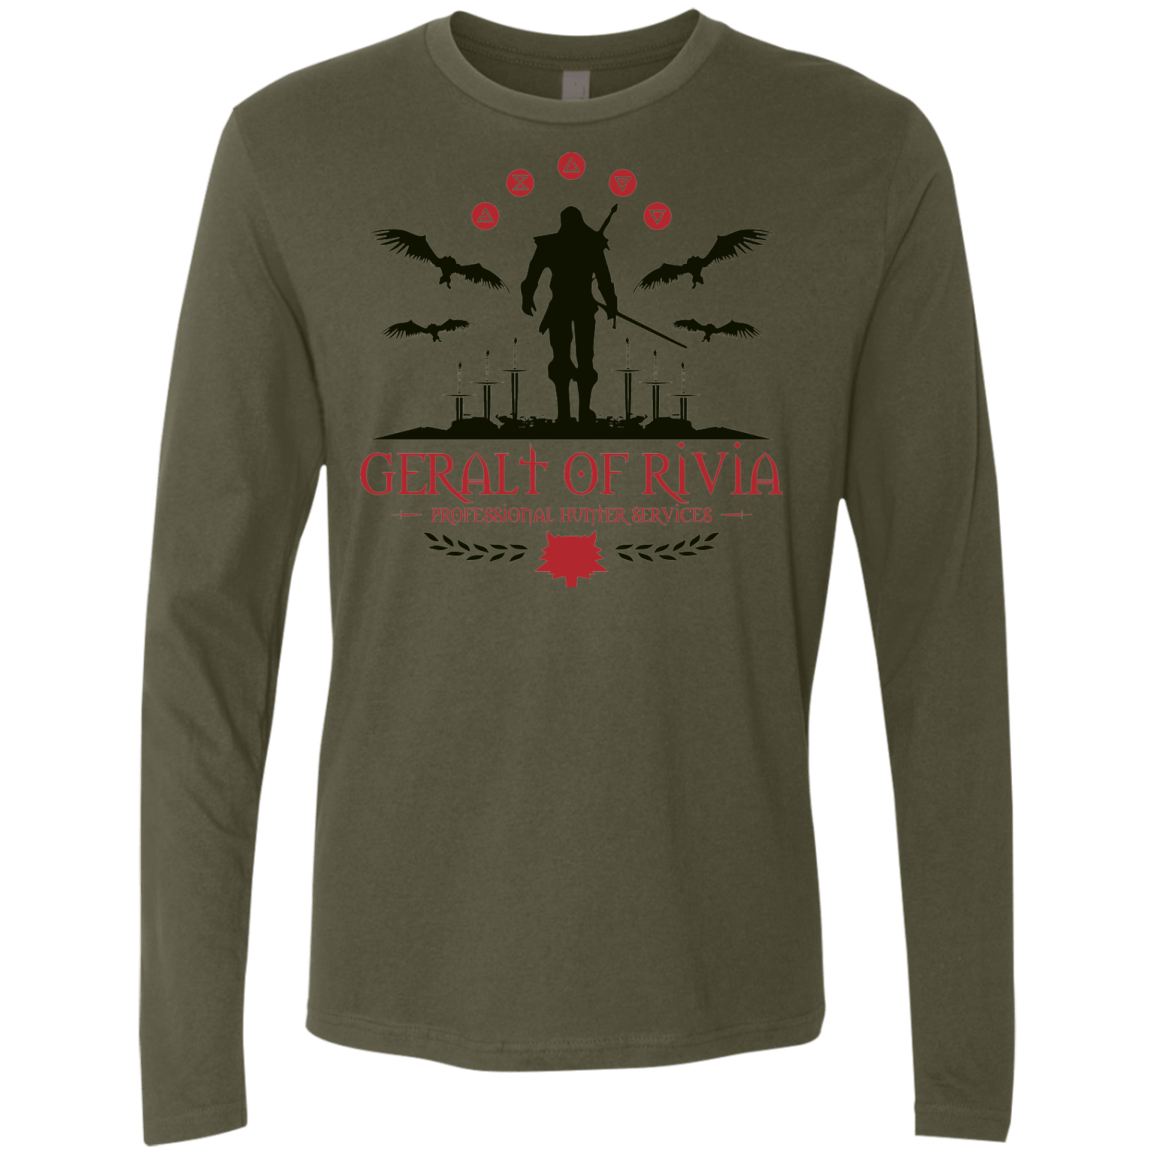 T-Shirts Military Green / Small The Witcher 3 Wild Hunt Men's Premium Long Sleeve